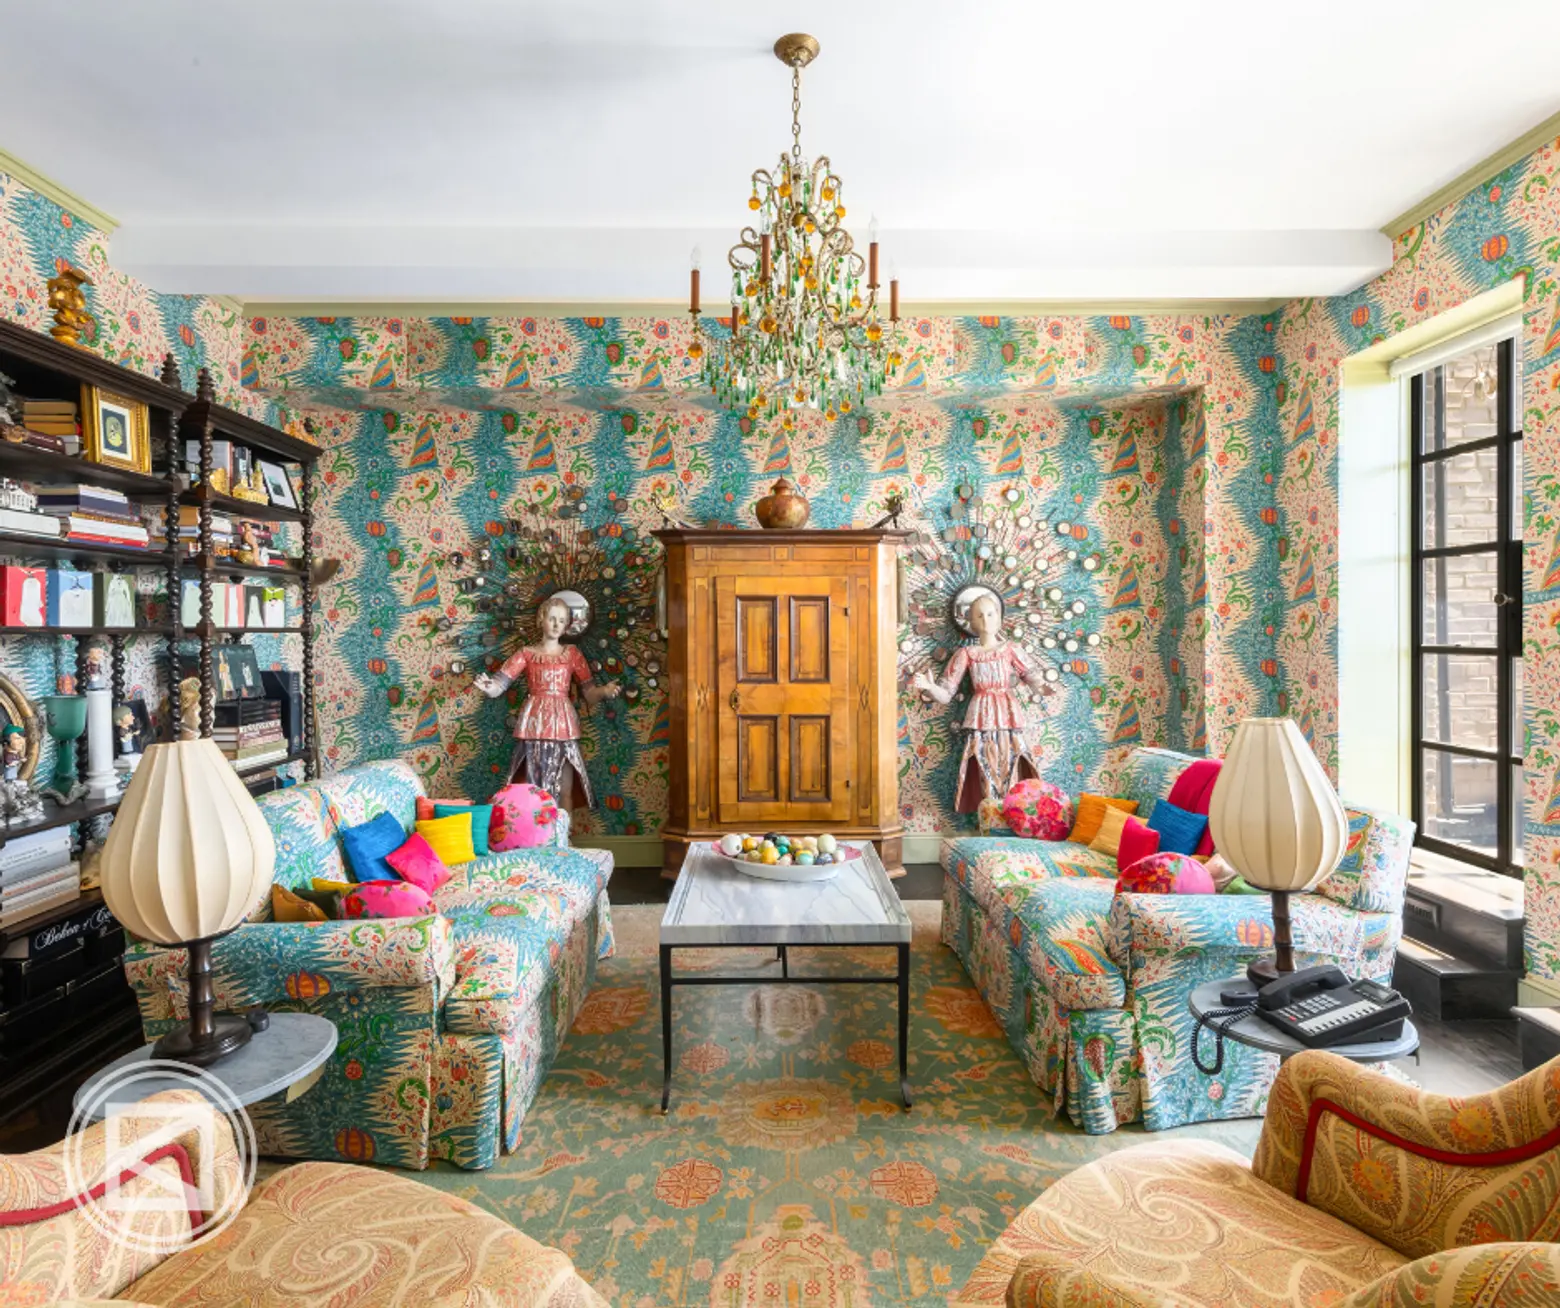 At the Upper West Side's iconic El Dorado, a $20M duplex with iconic ...